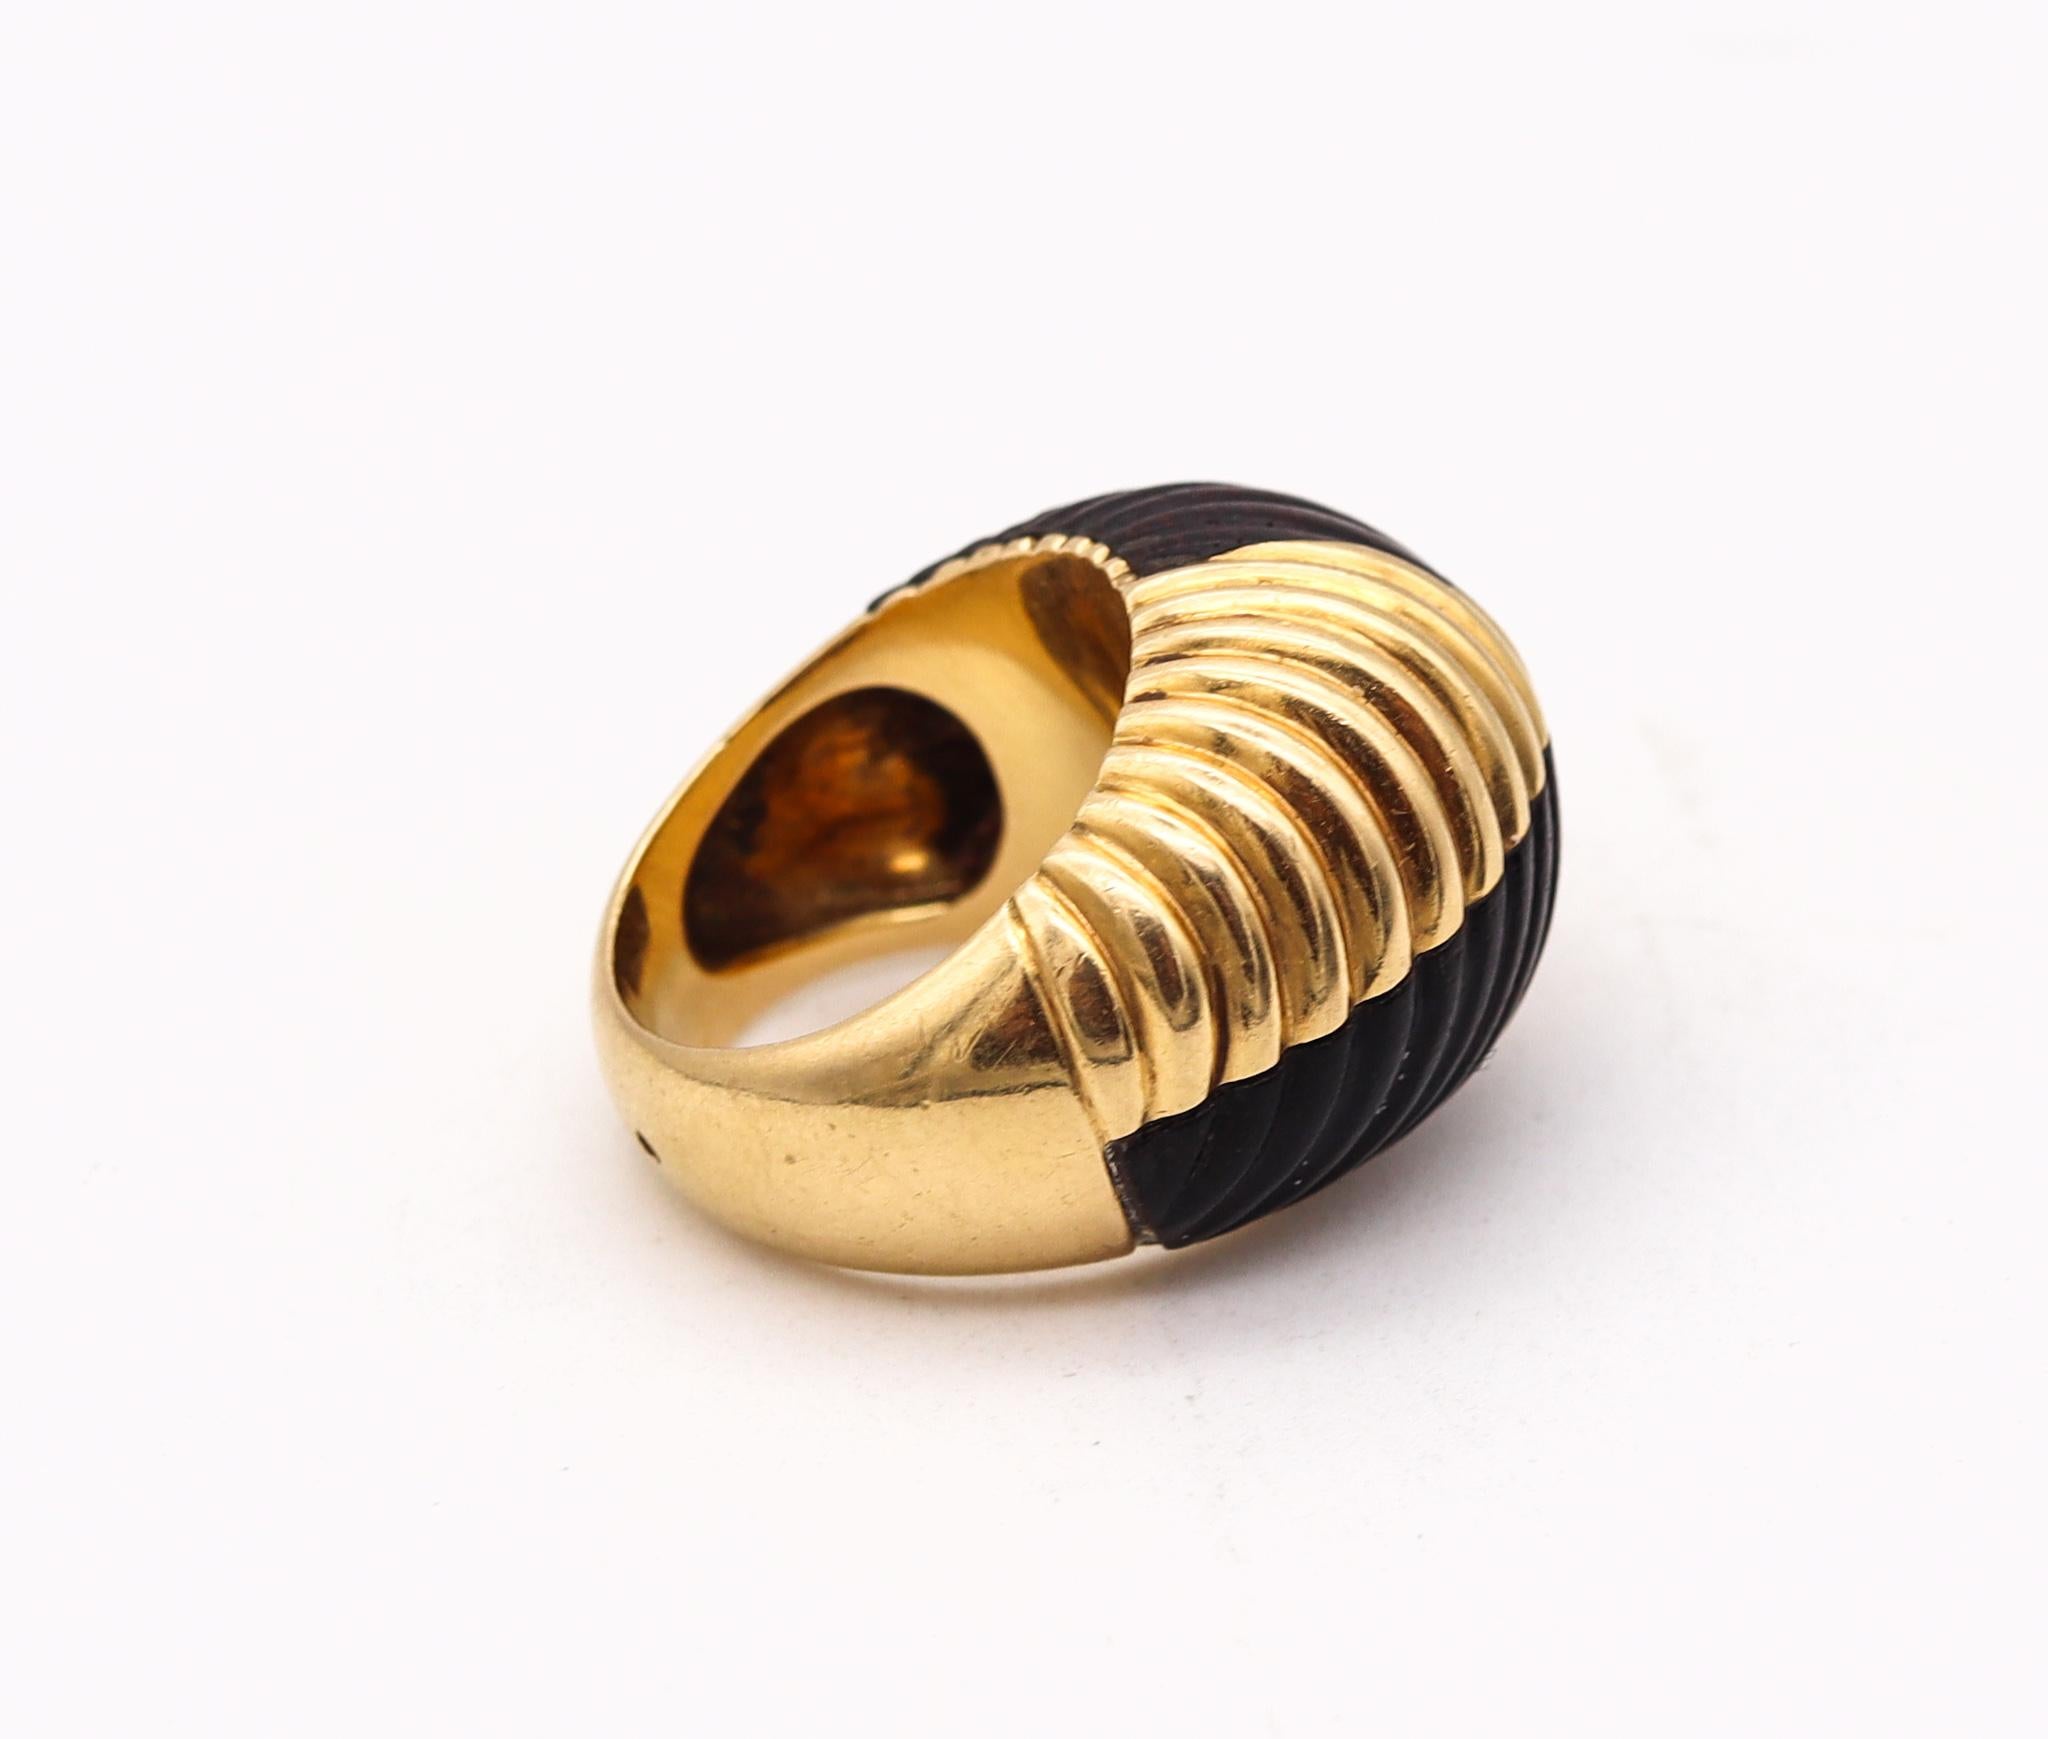 Women's Van Cleef & Arpels 1970 Paris Bombe Wood Cocktail Ring in 18Kt Yellow Gold For Sale